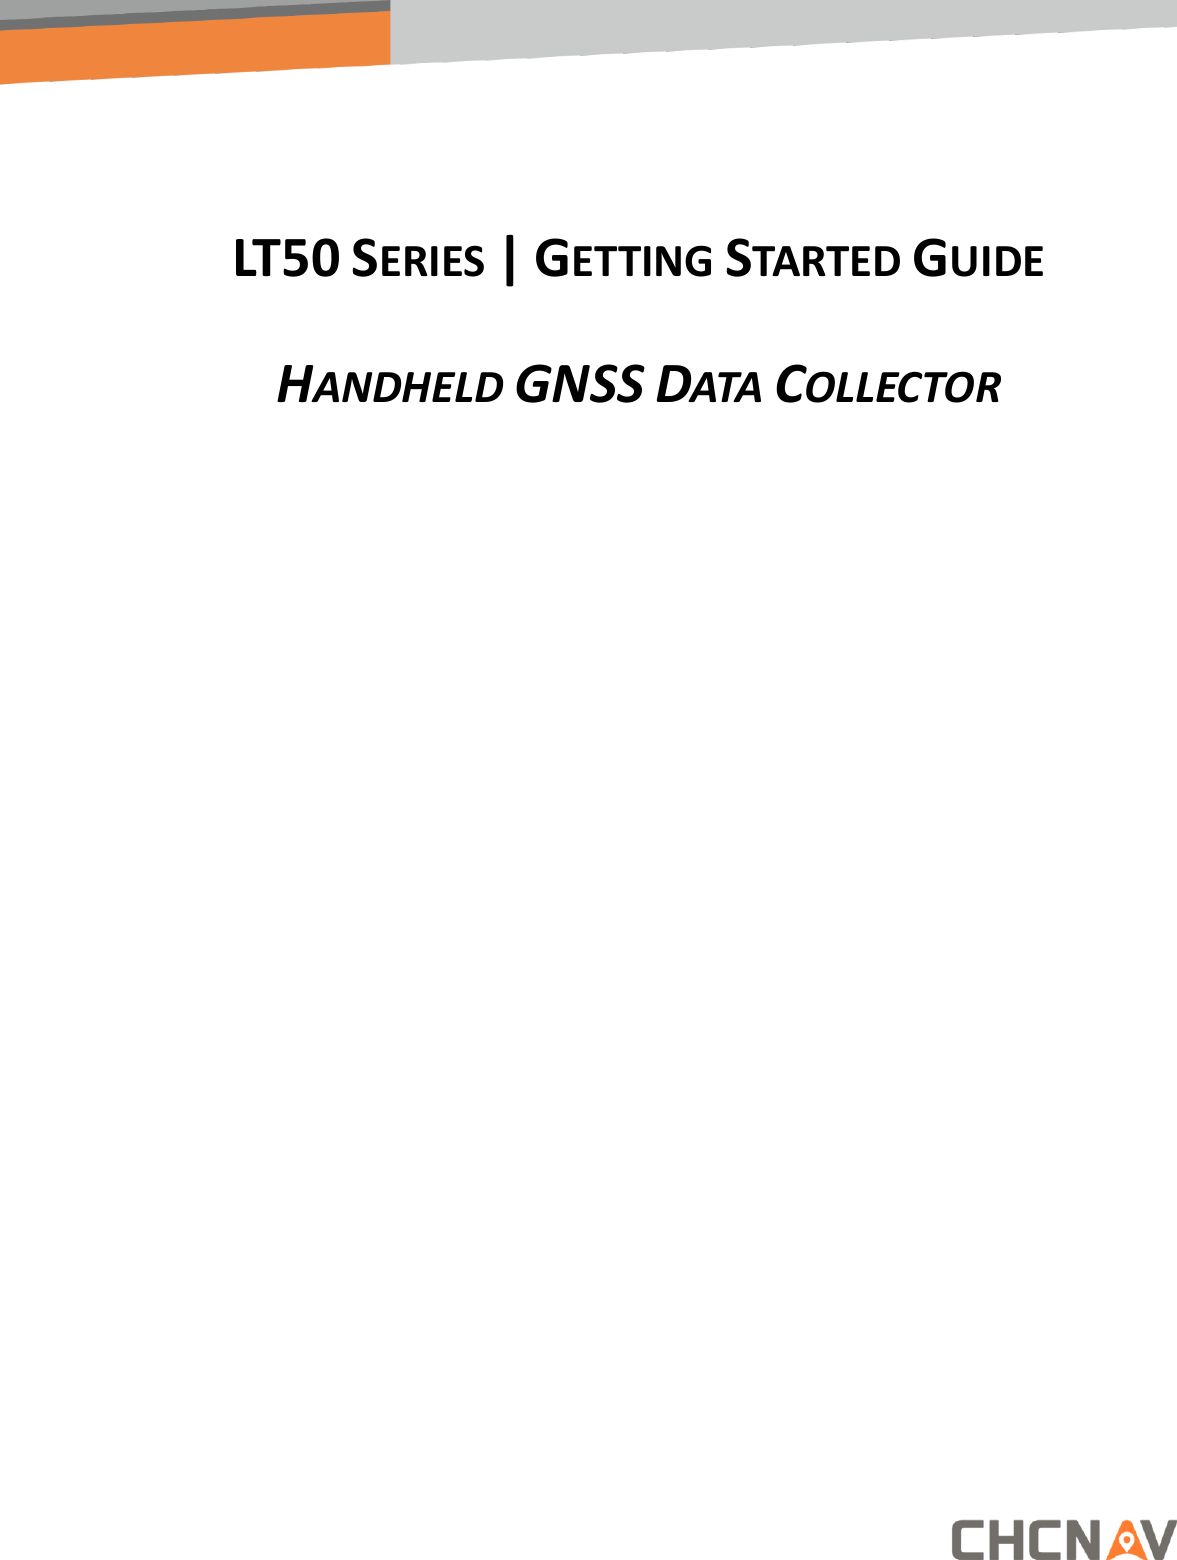   LT50 SERIES | GETTING STARTED GUIDE HANDHELD GNSS DATA COLLECTOR   